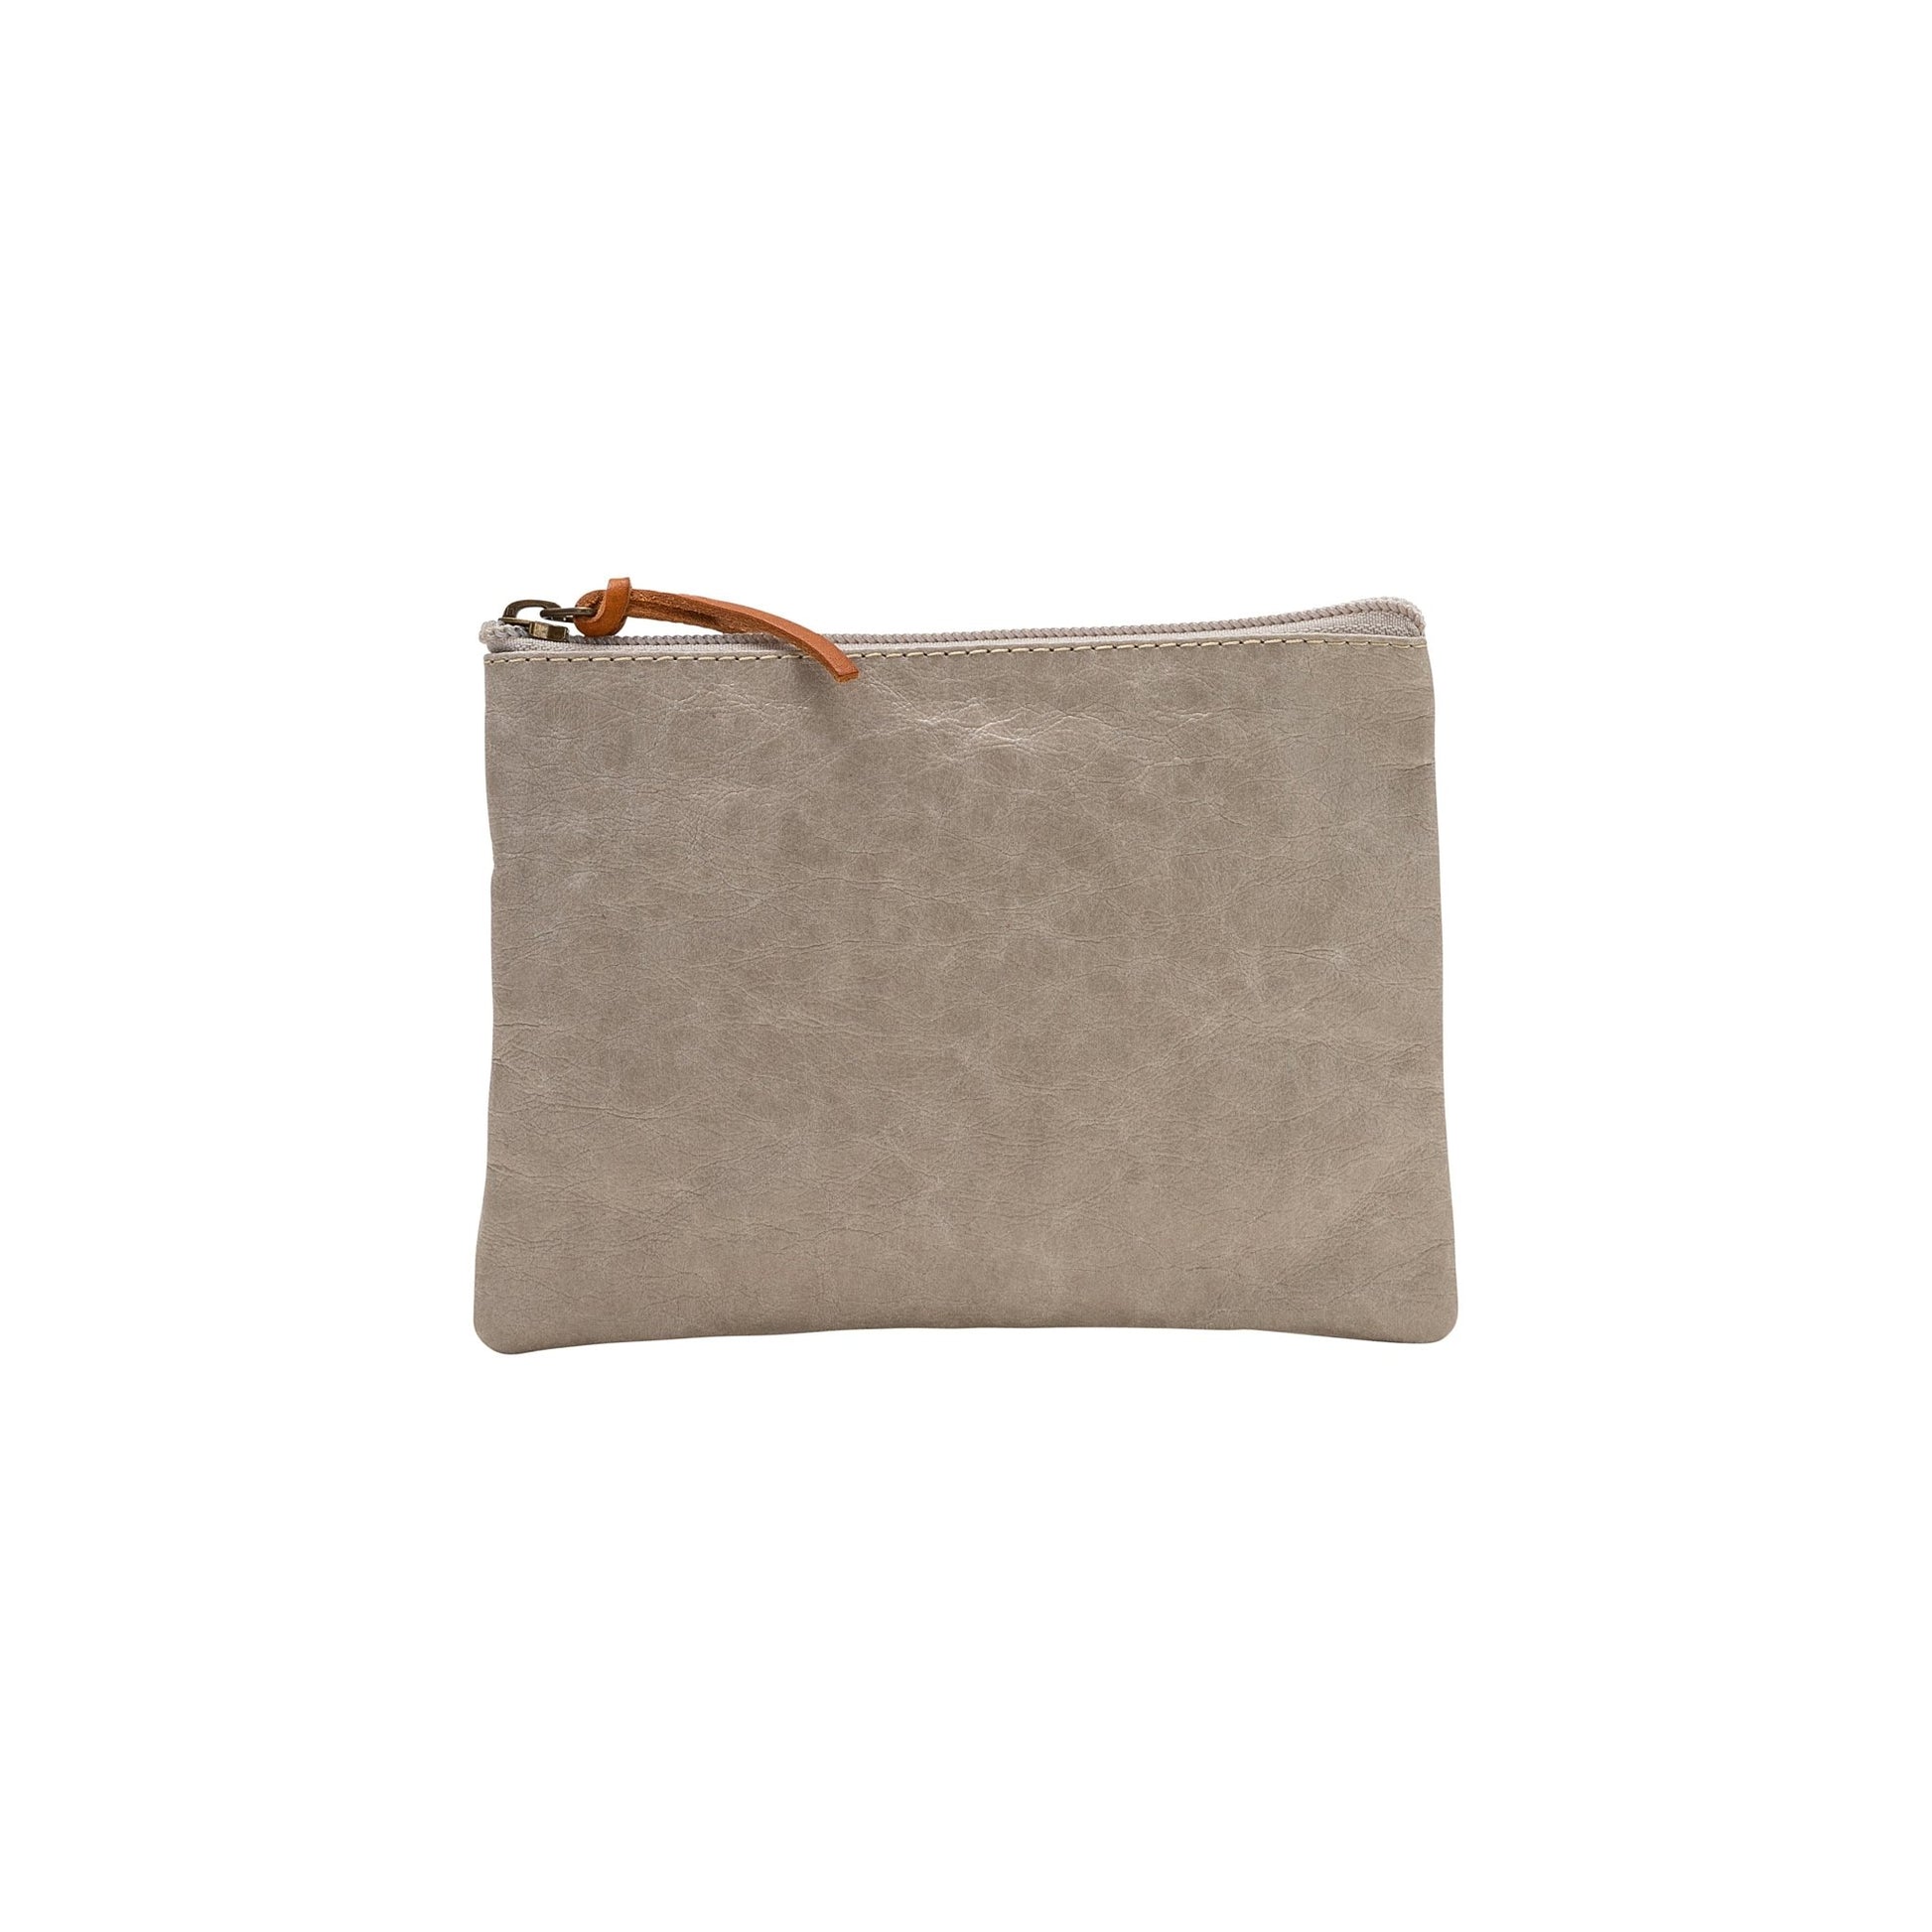 A washable paper pouch is shown from the front in grey, featuring a brown zip toggle.